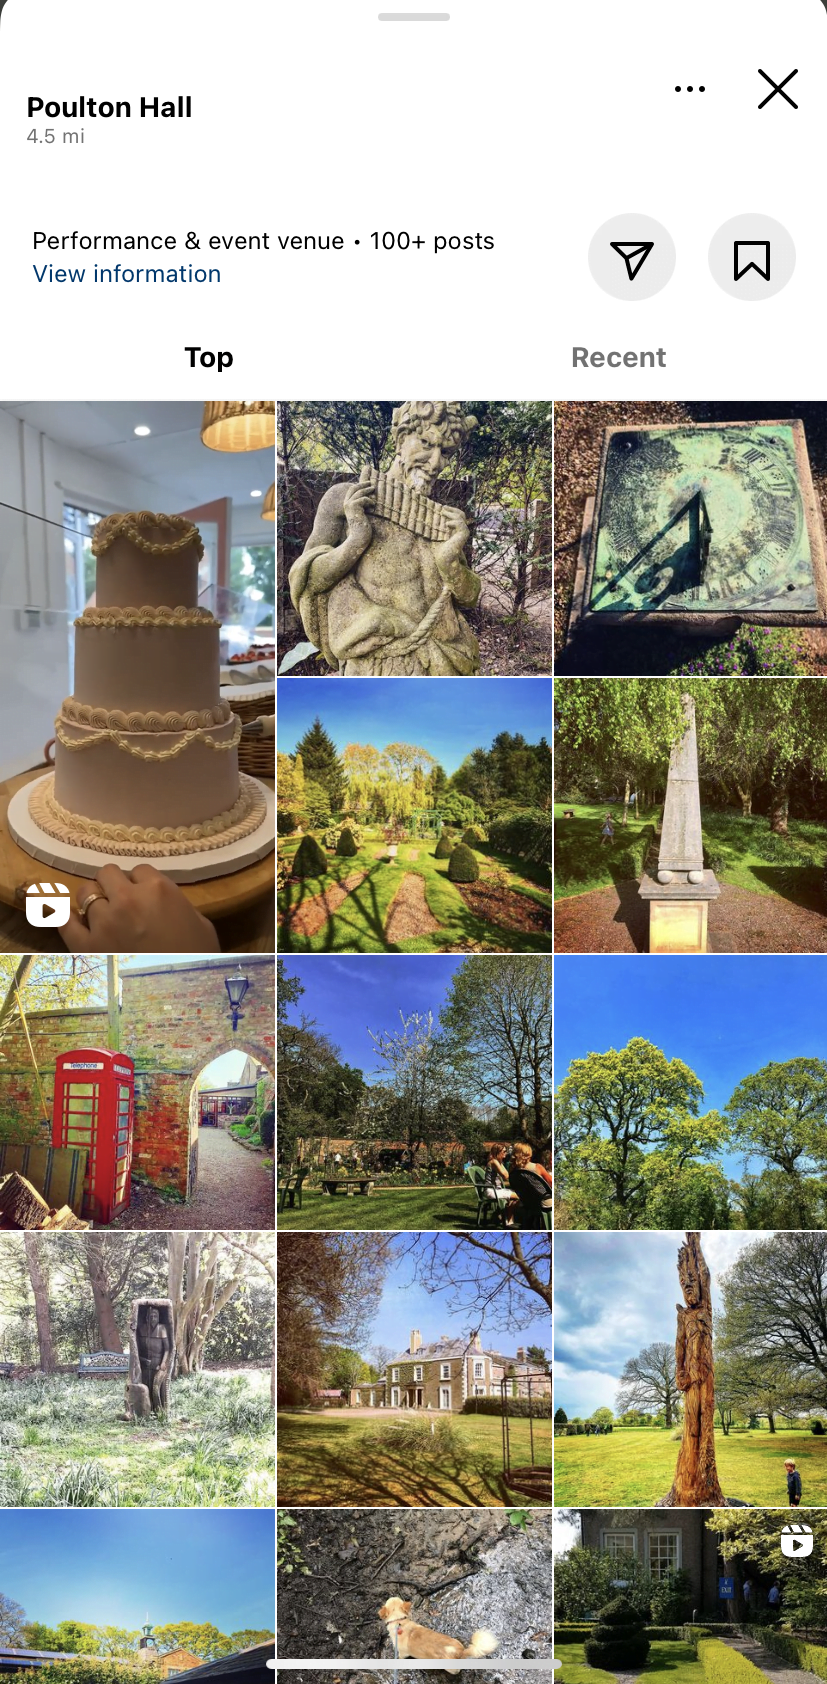 photos for poulton hall to use from social media